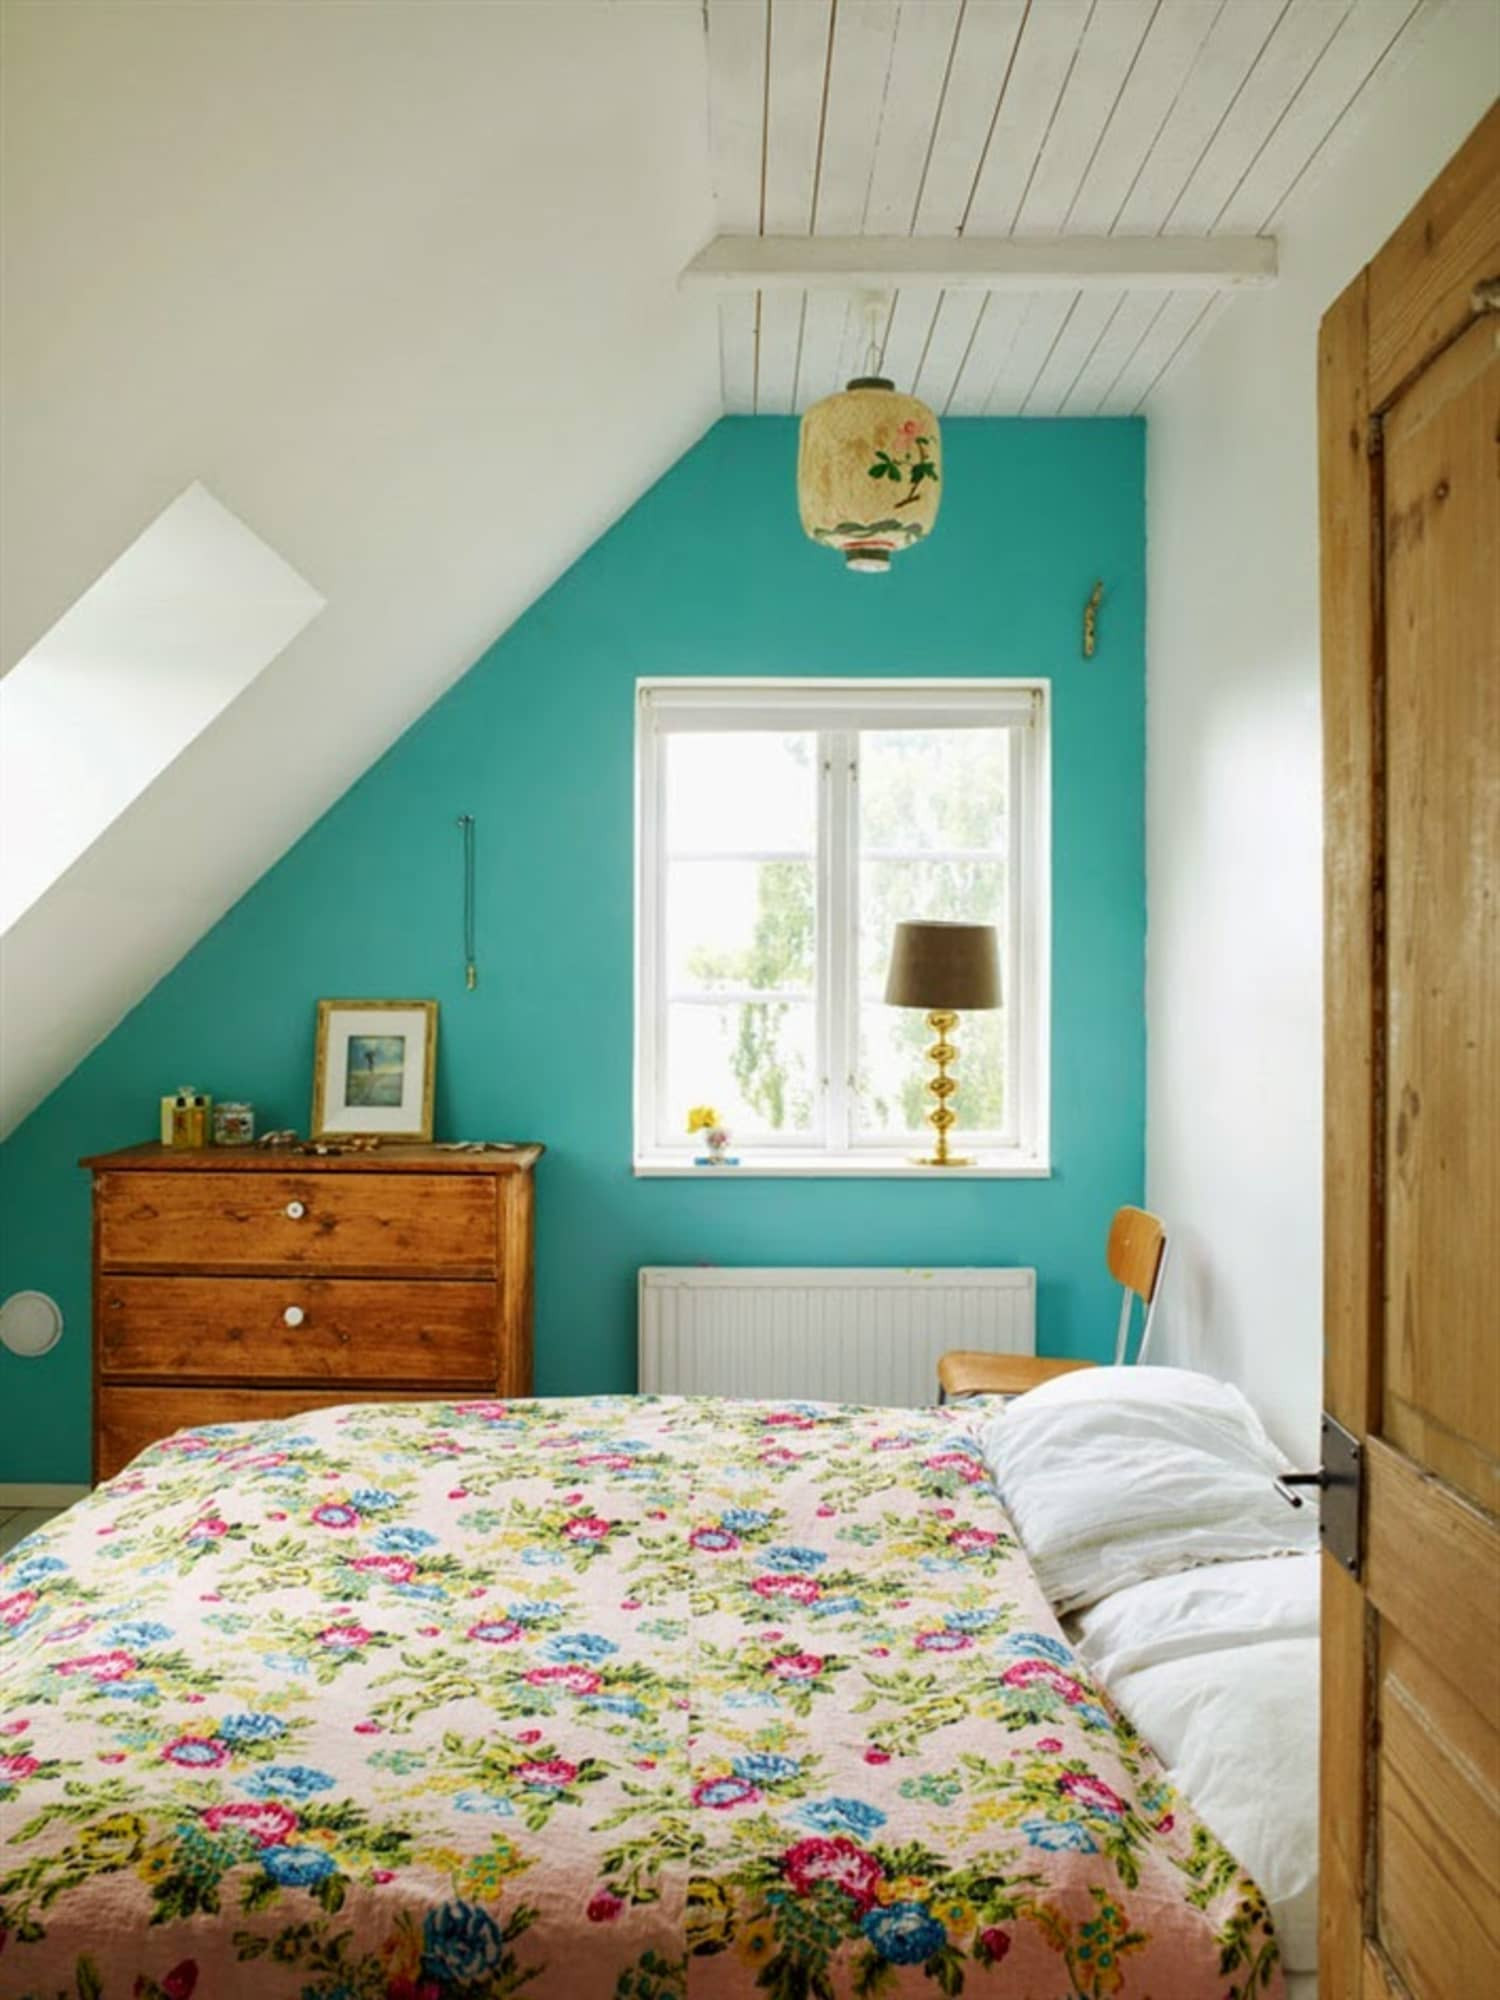 Small Bedroom Paint Ideas Pictures
 Paint Color Ideas That Work in Small Bedrooms